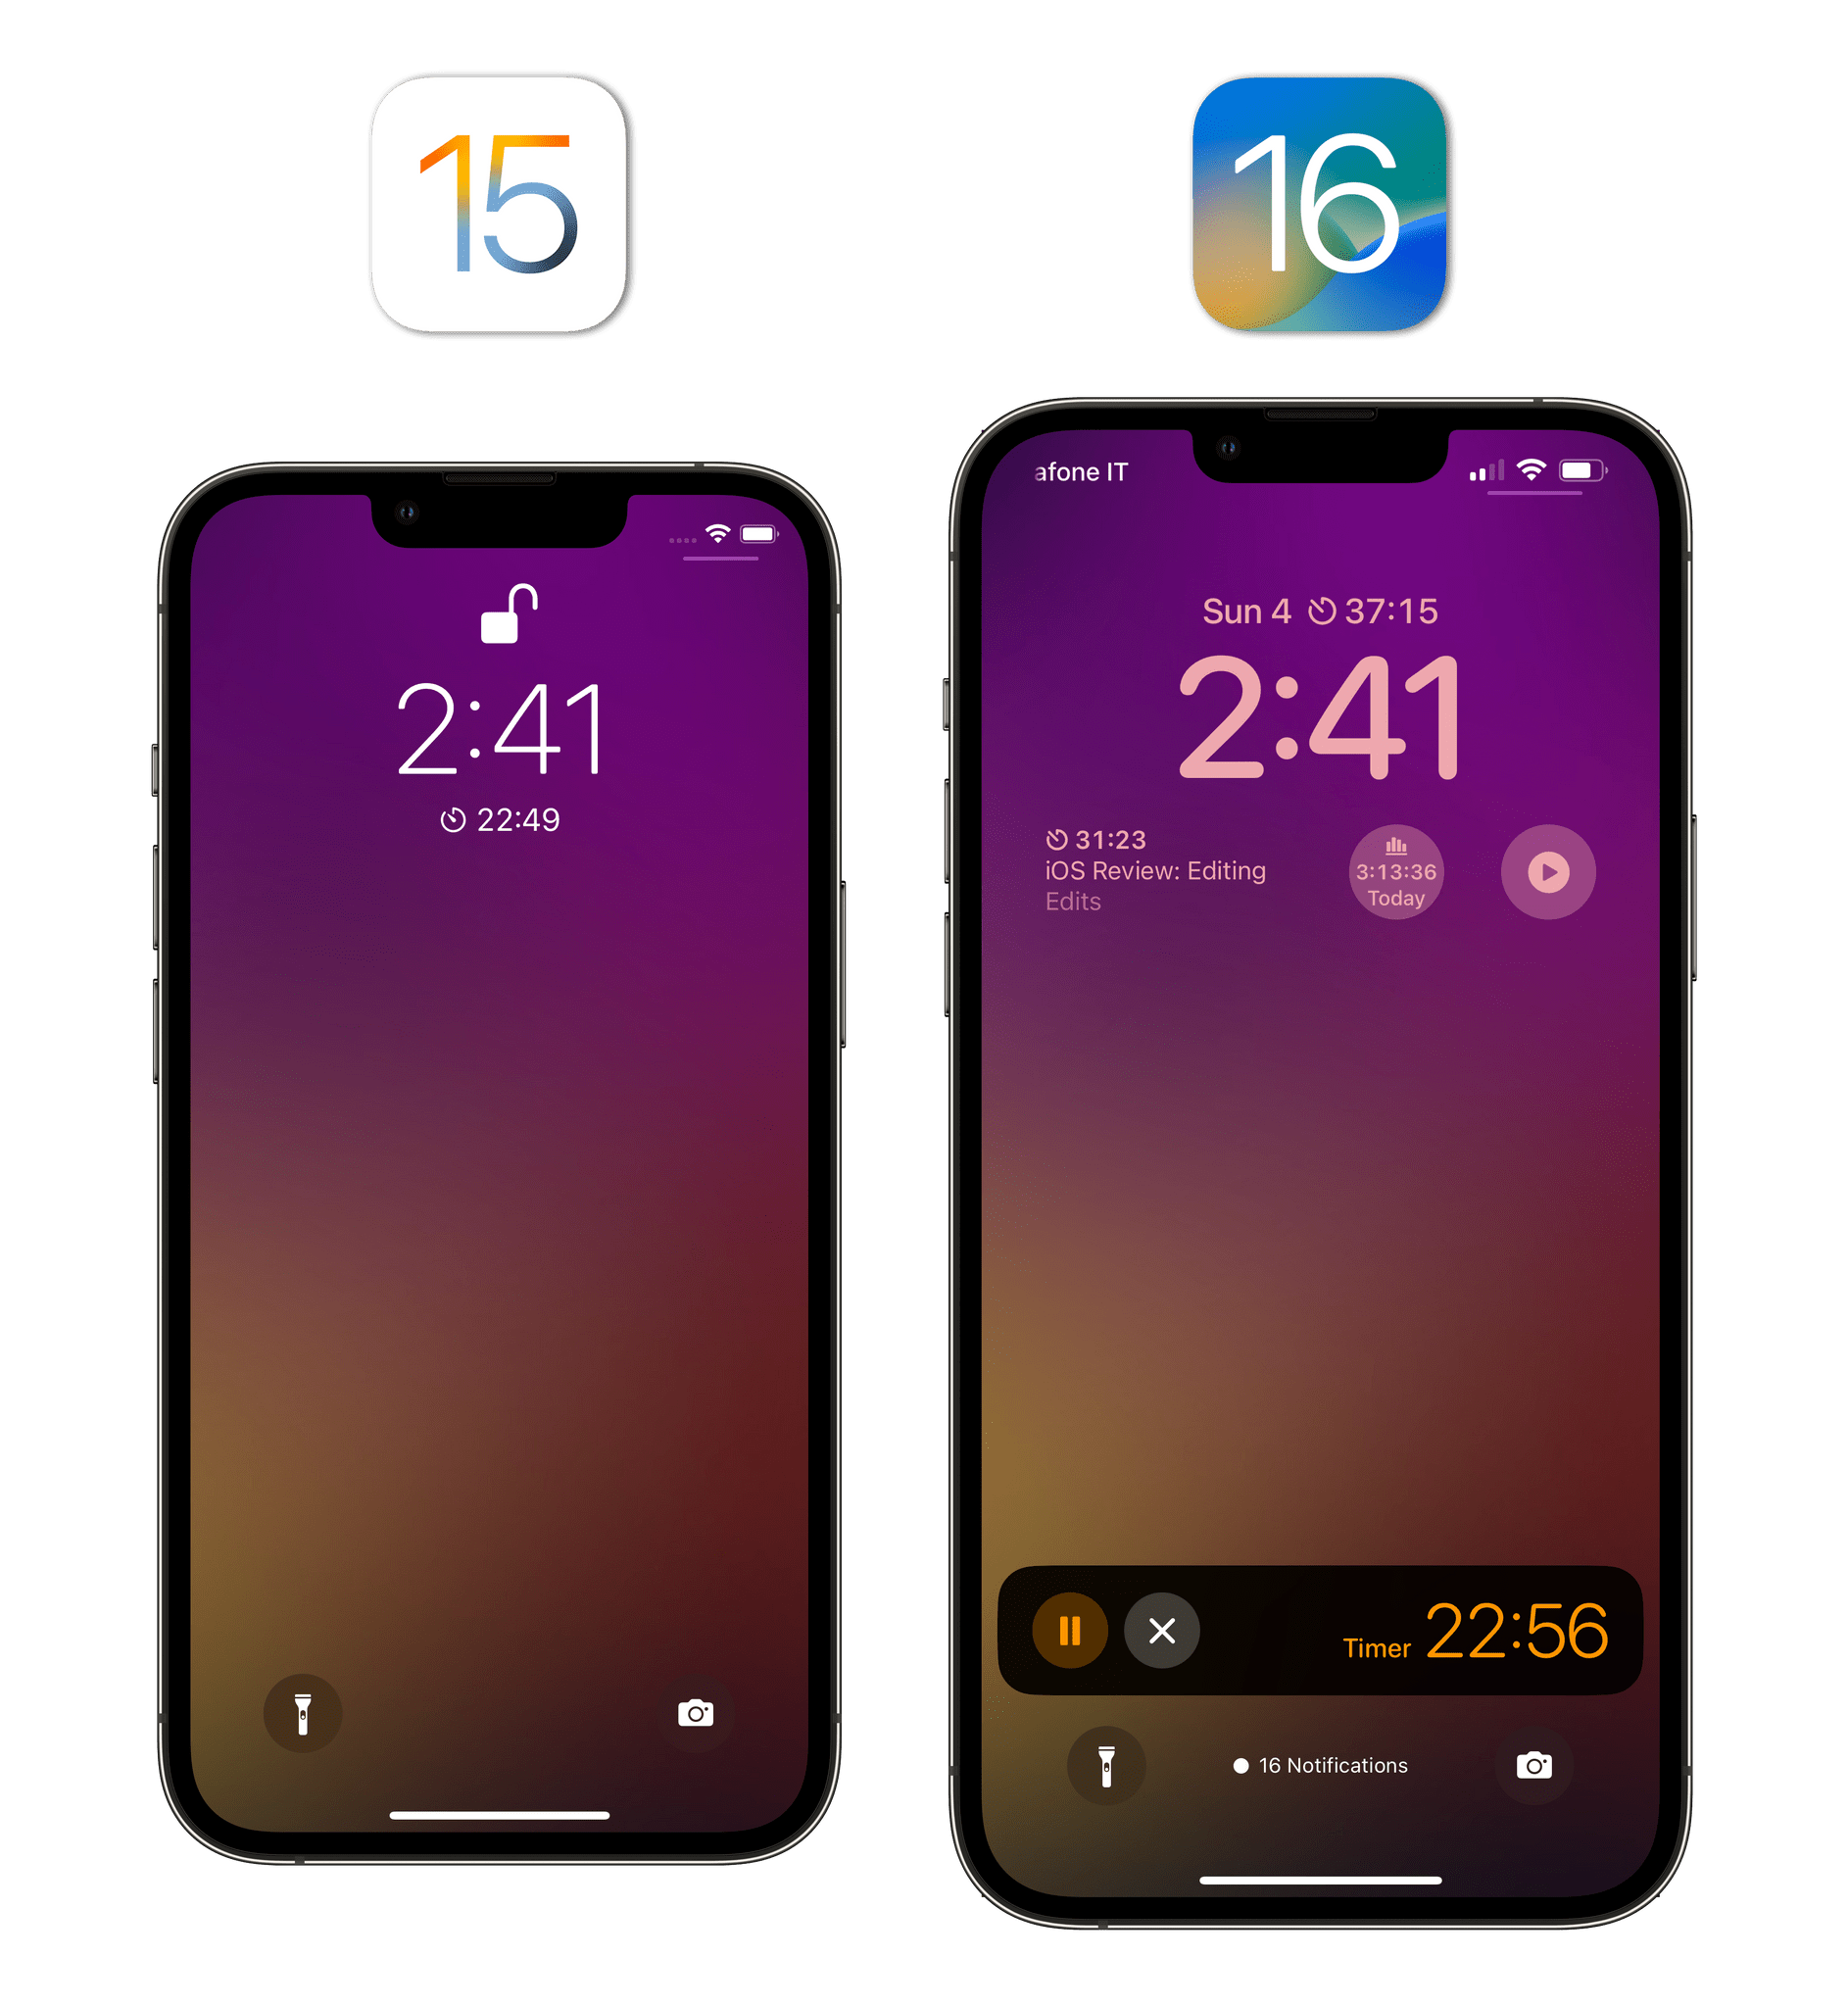 A running timer on the Lock Screen in iOS 15 (left) compared to the new Live Activity-based one in iOS 16.